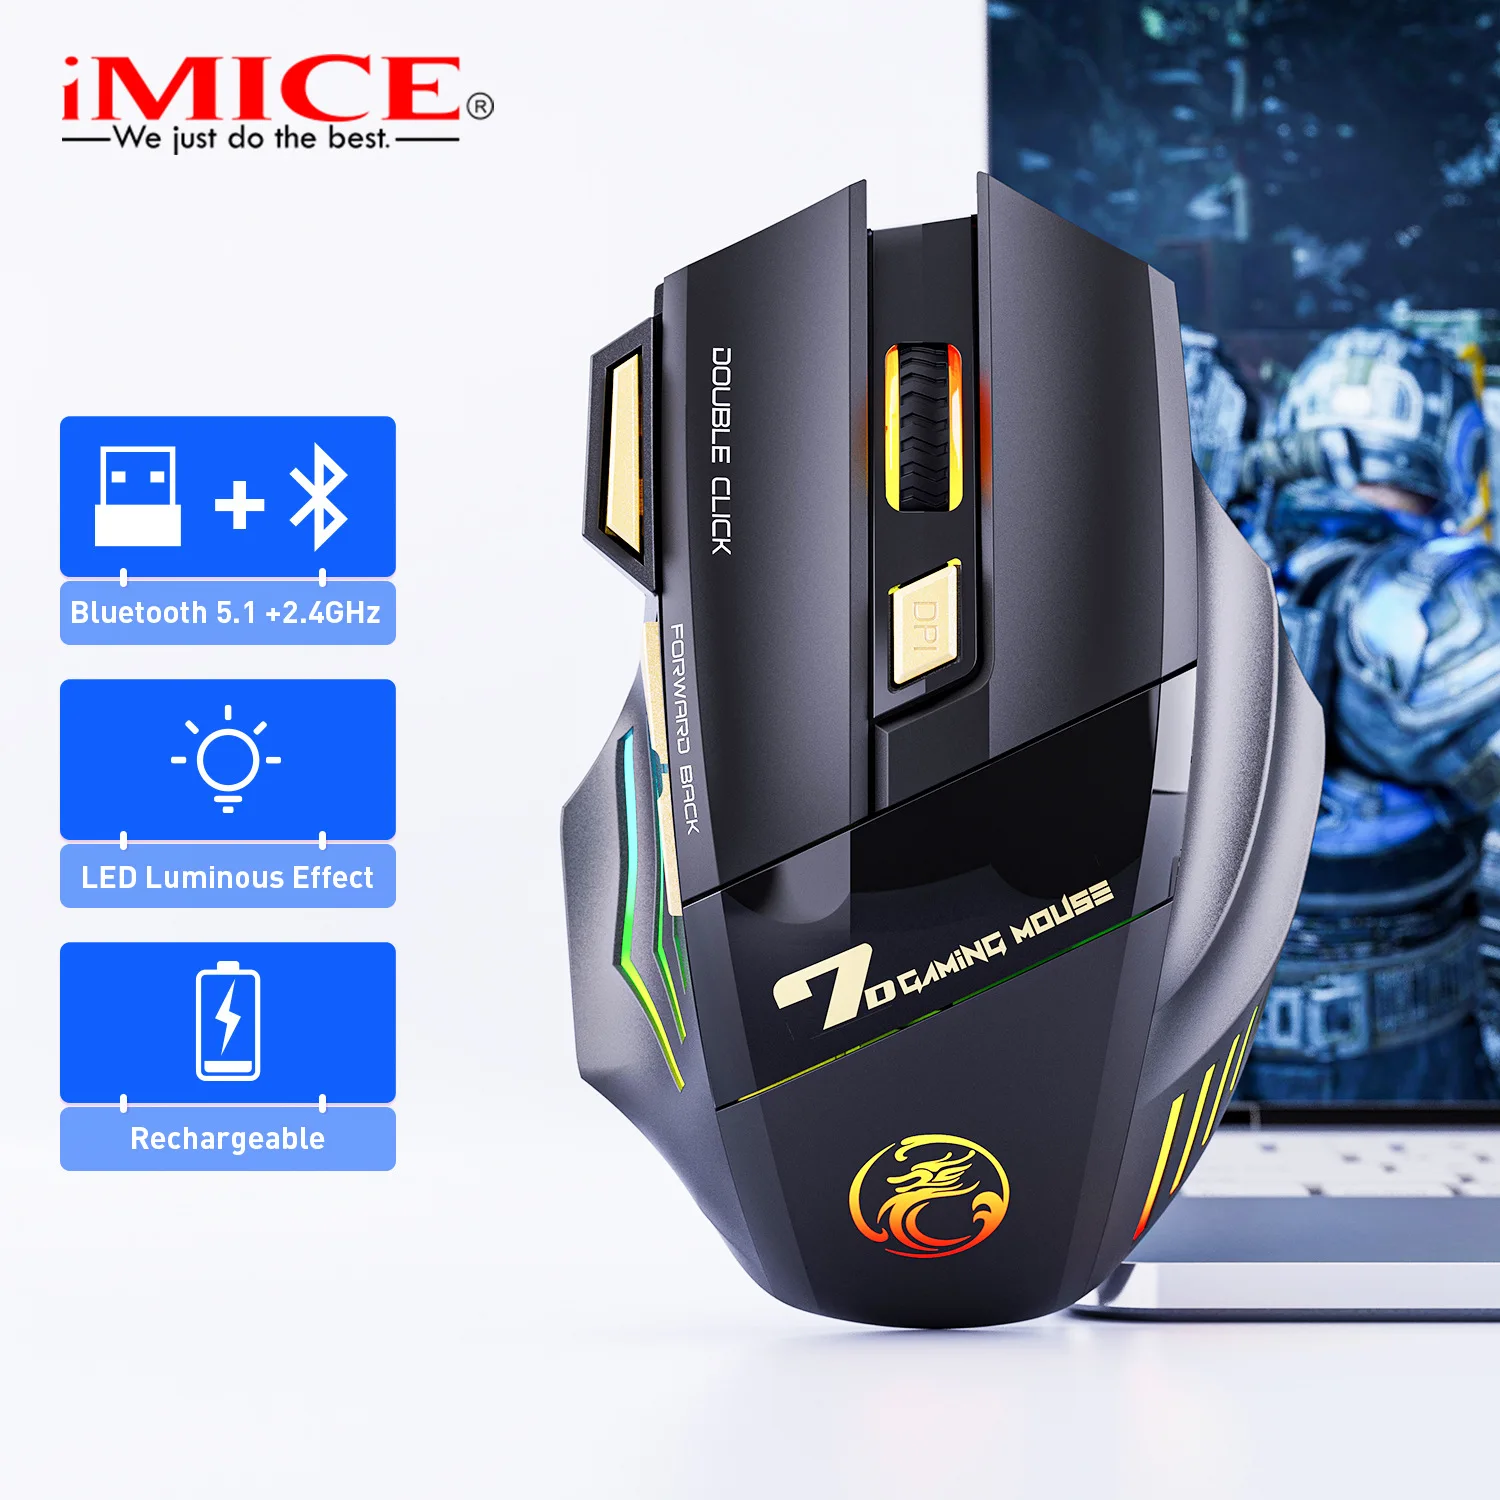 

Ergonomic Wired Gaming Mouse LED 5500 DPI USB Computer Mouse Gamer RGB Mice X7 Silent Mause With Backlight Cable For PC Laptop